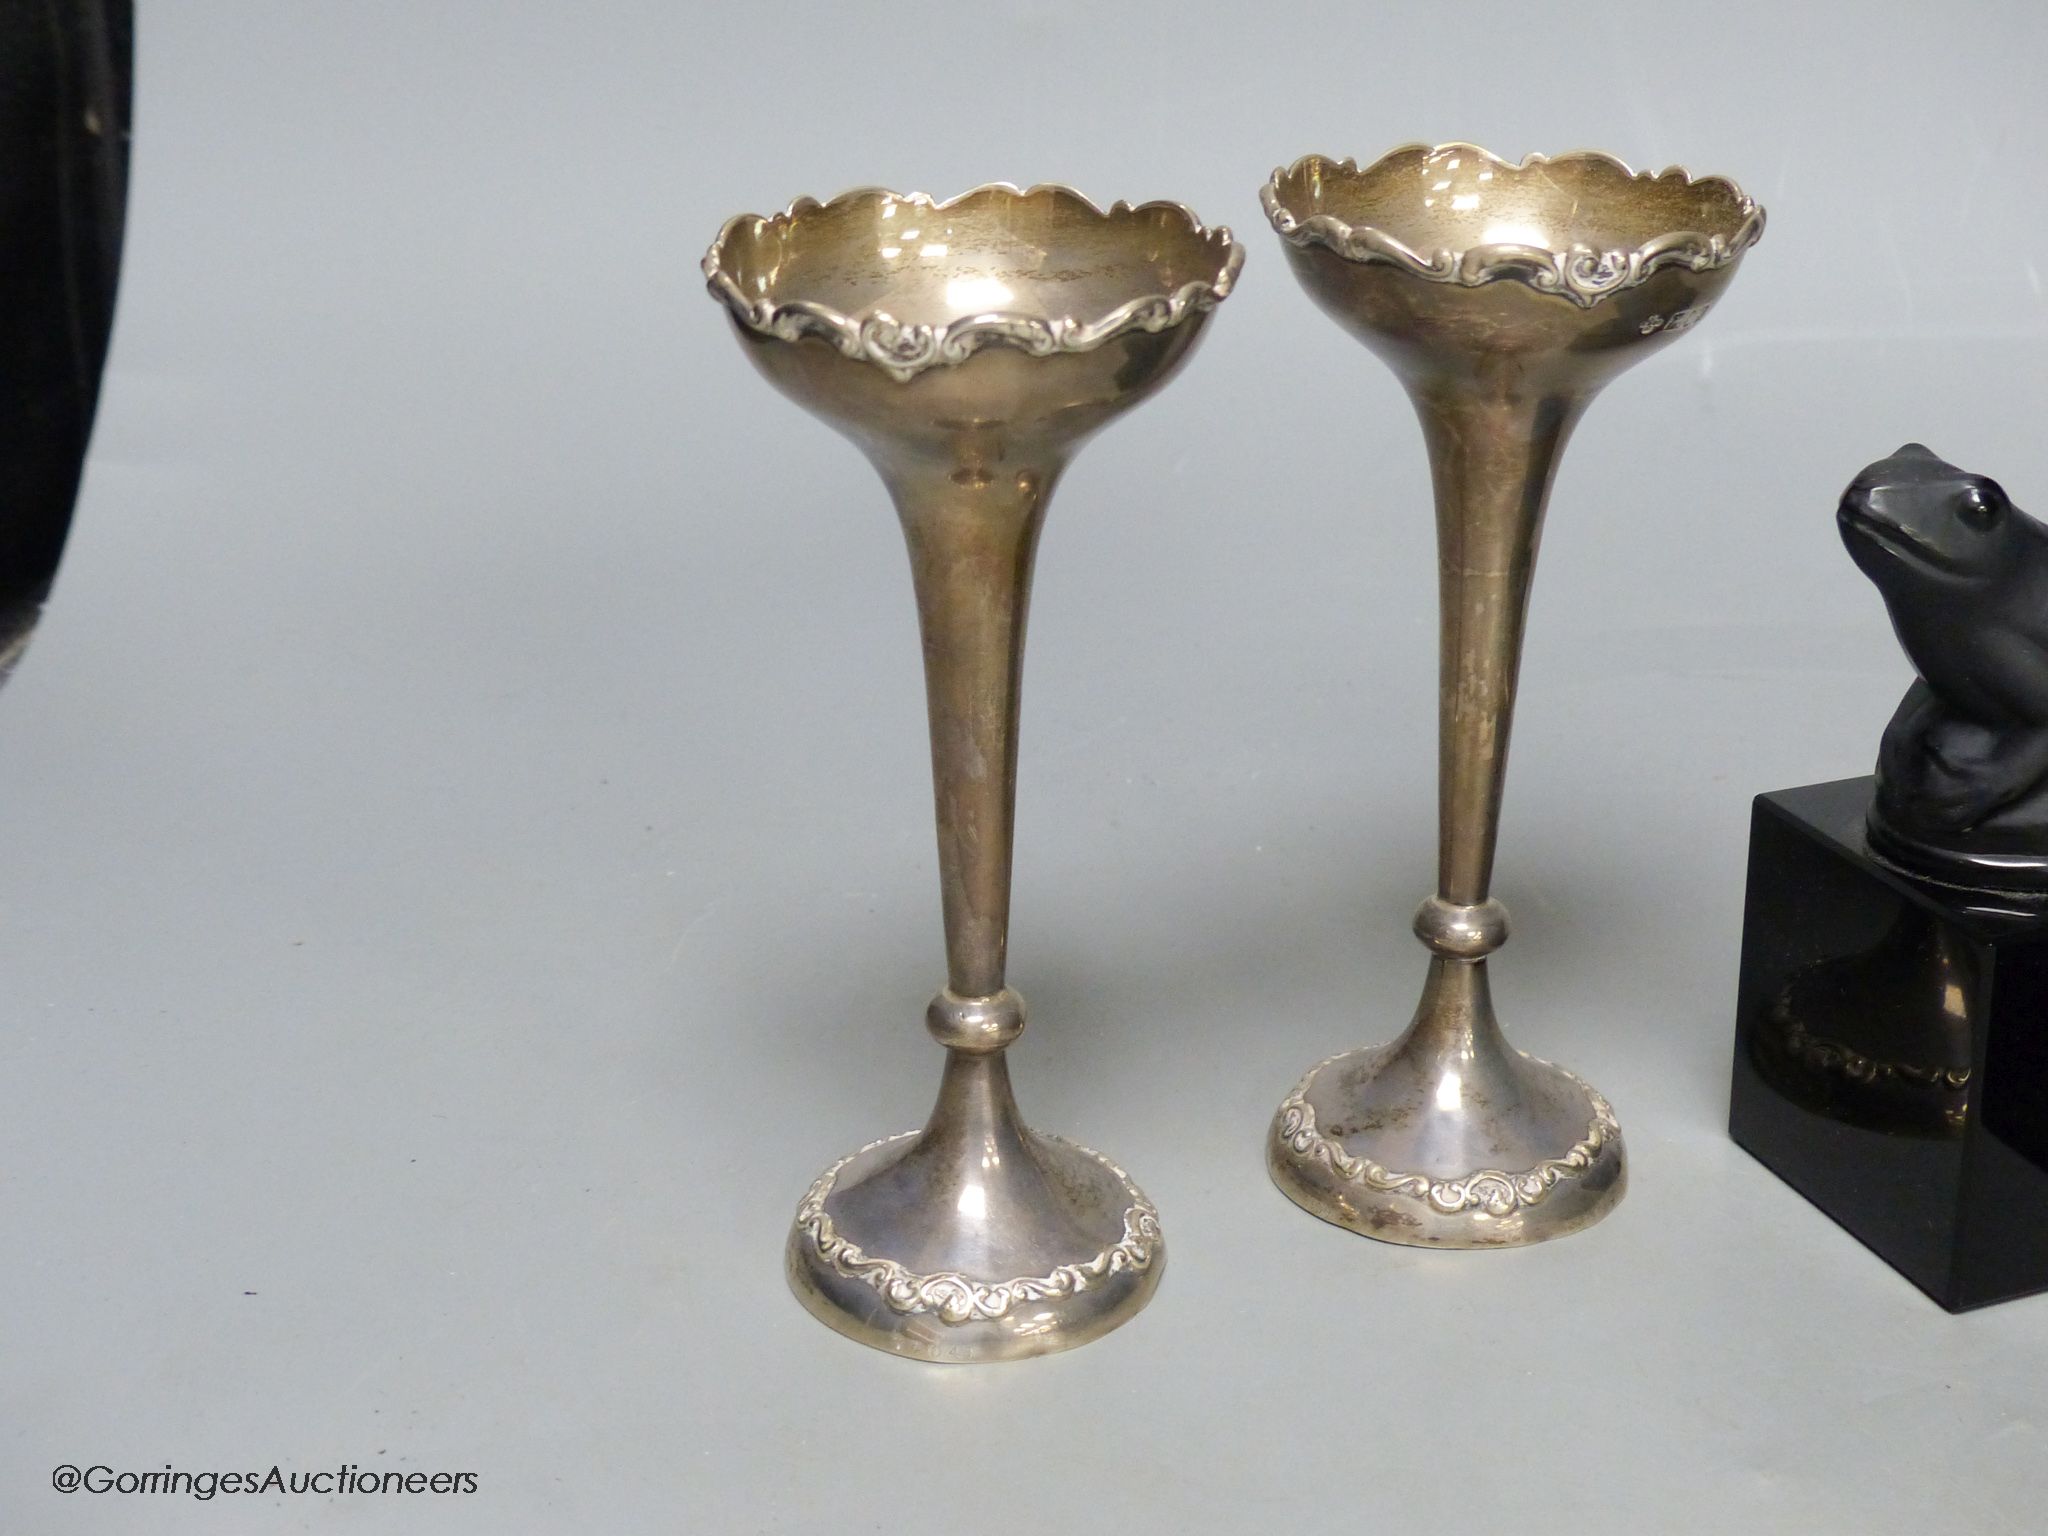 A pair of silver specimen vases, height 14cm, and a pair of black glass frogs